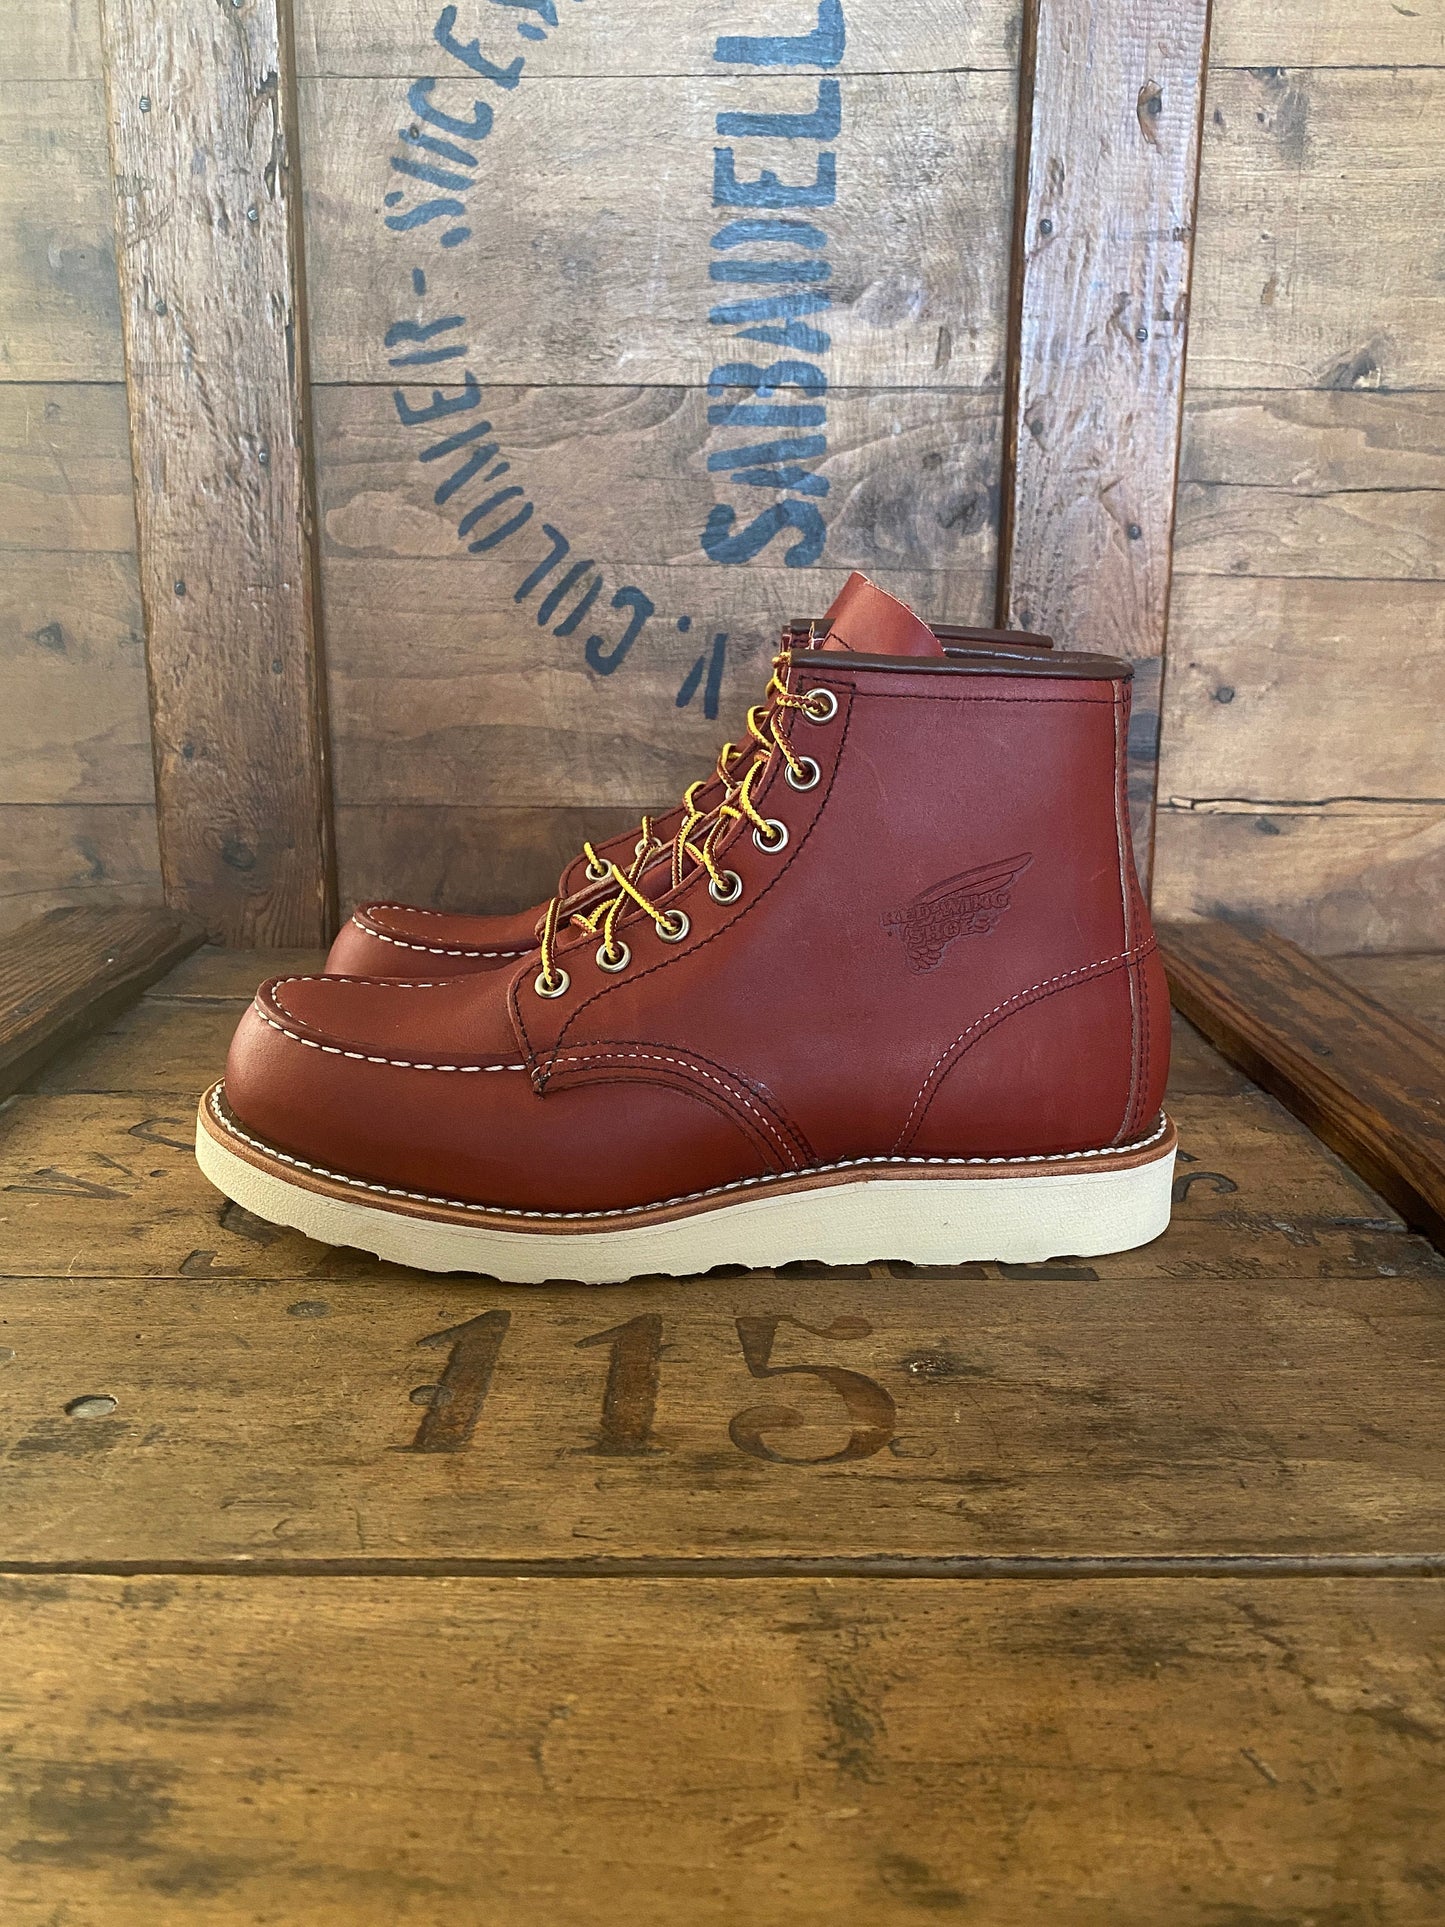 Red Wing 8131 Moc Toe Oro Russet Boots, size 6.5D (38.5 Euro) - front view. Made in USA. Factory seconds.